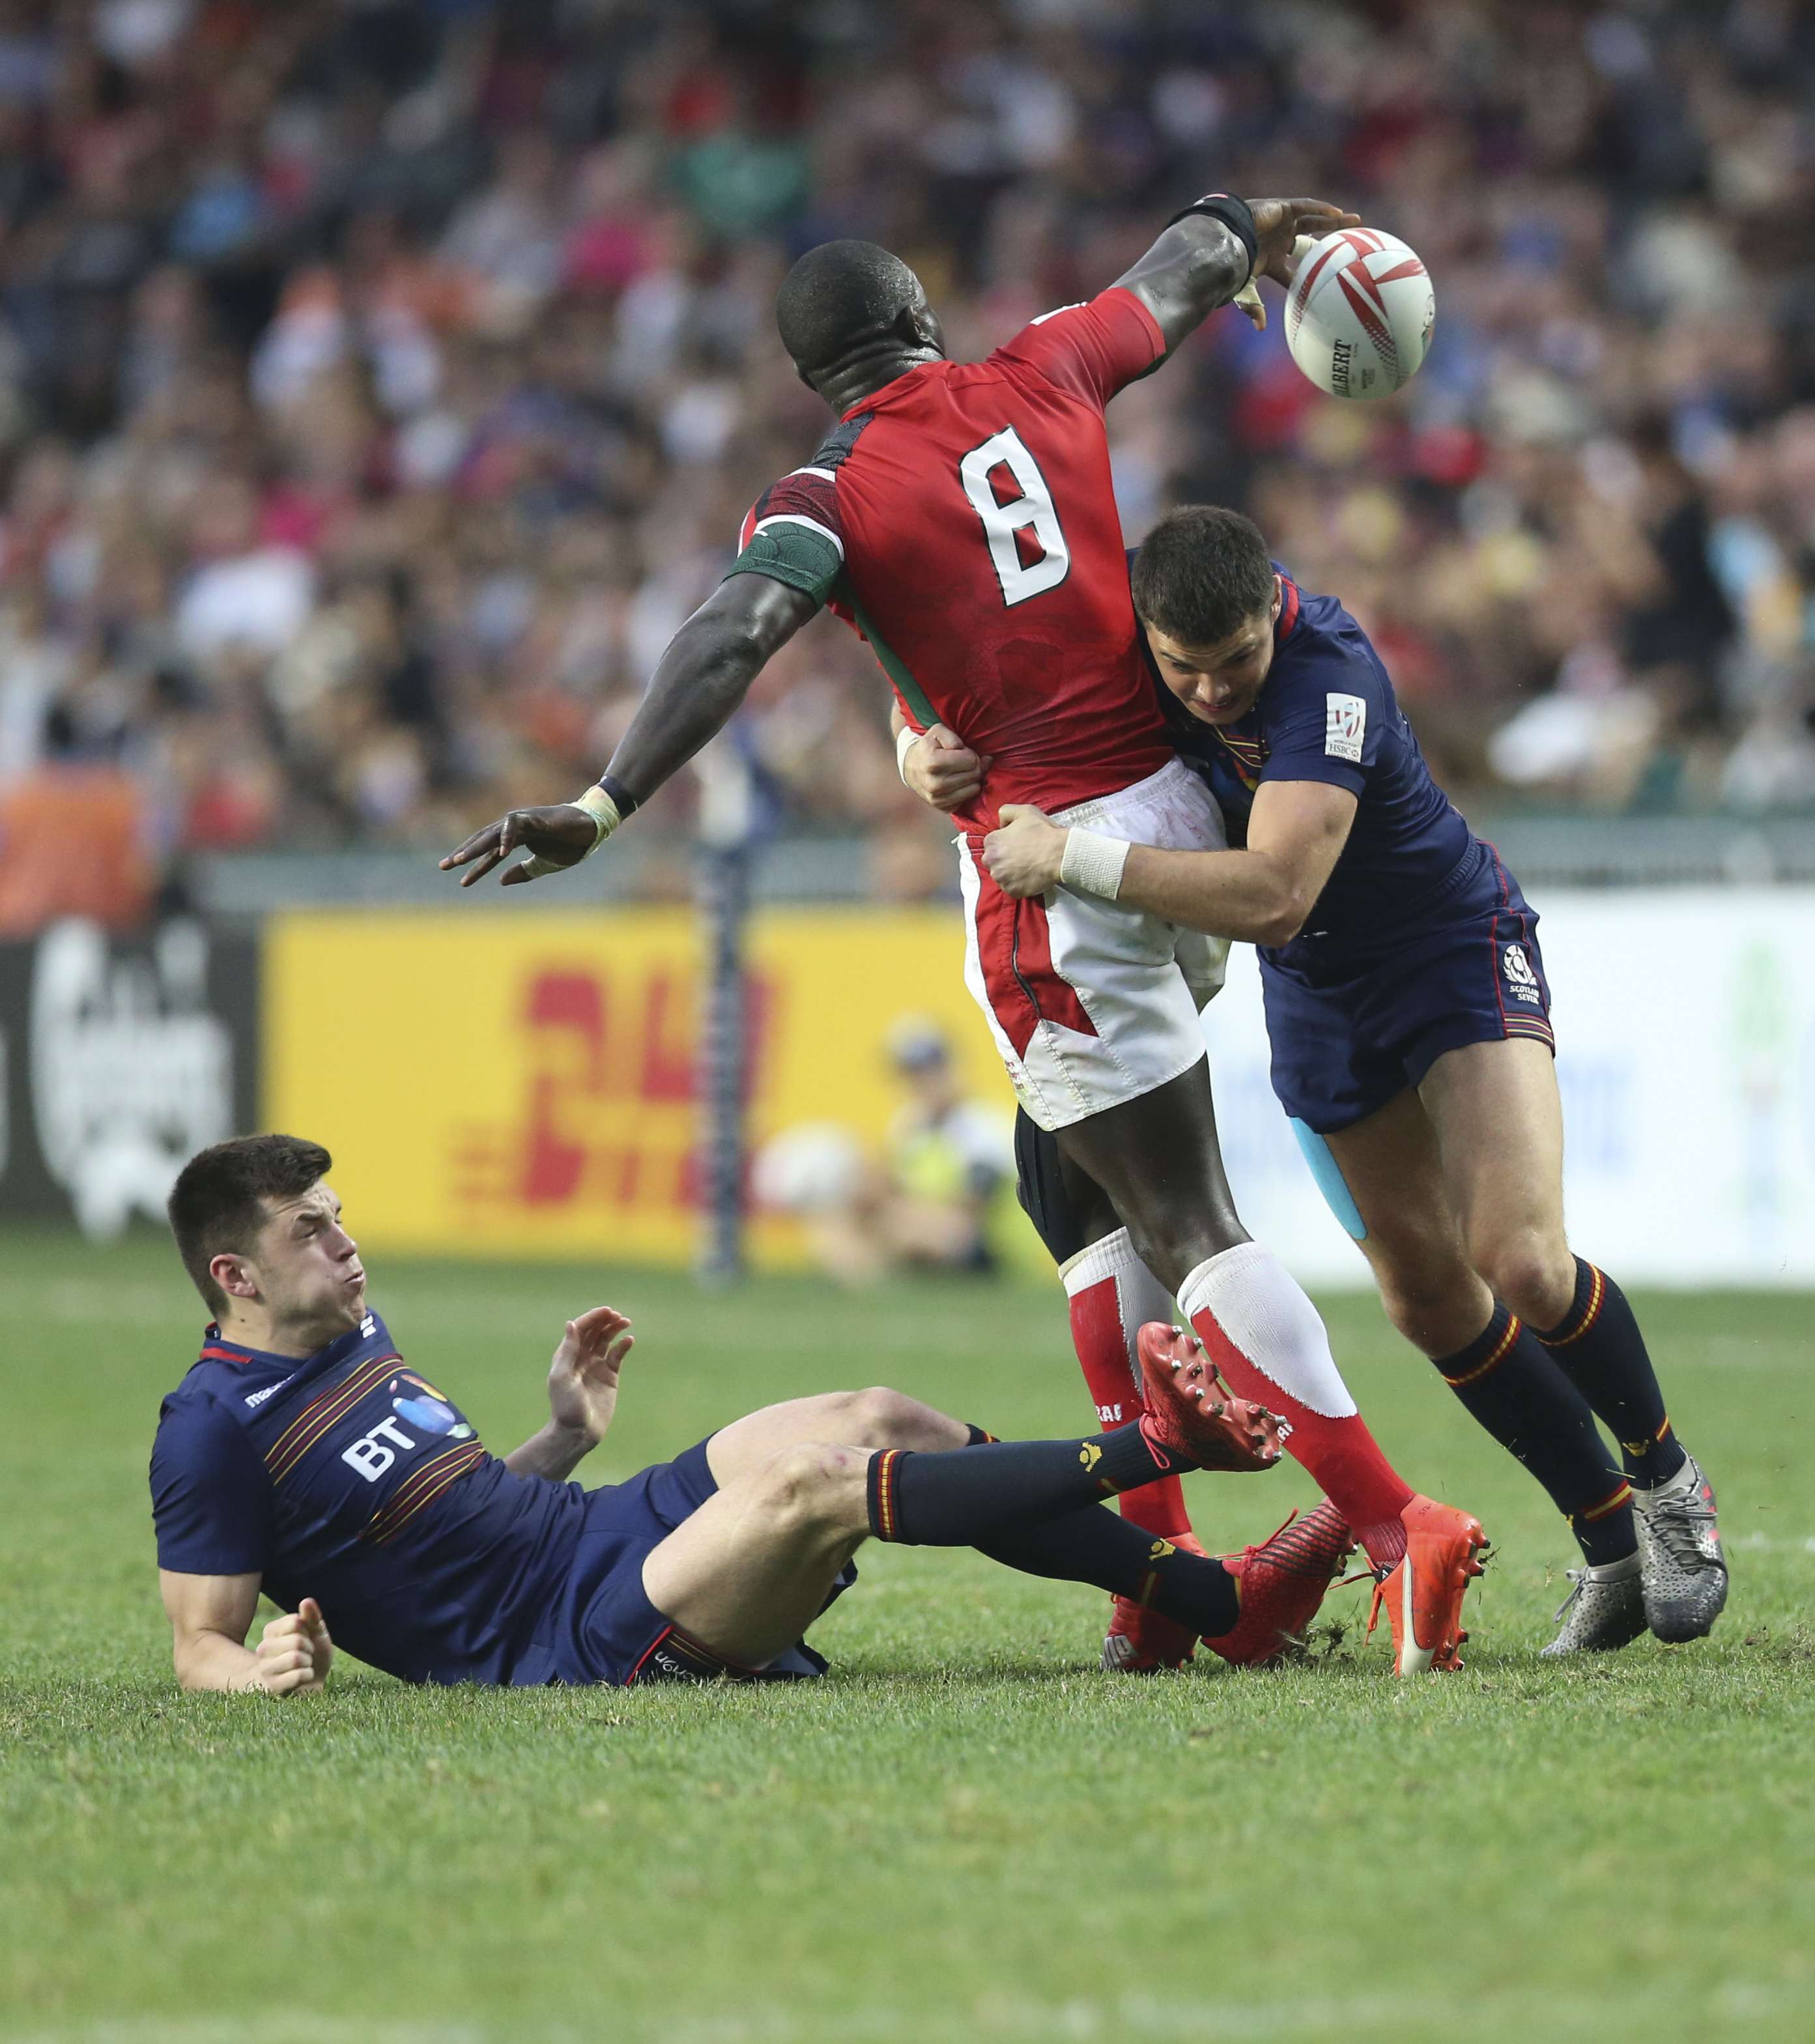 Kenya’s Andrew Amonde is tackled by Bobby Beattie from Scotland in the Bowl final. Photo: Dickson Lee